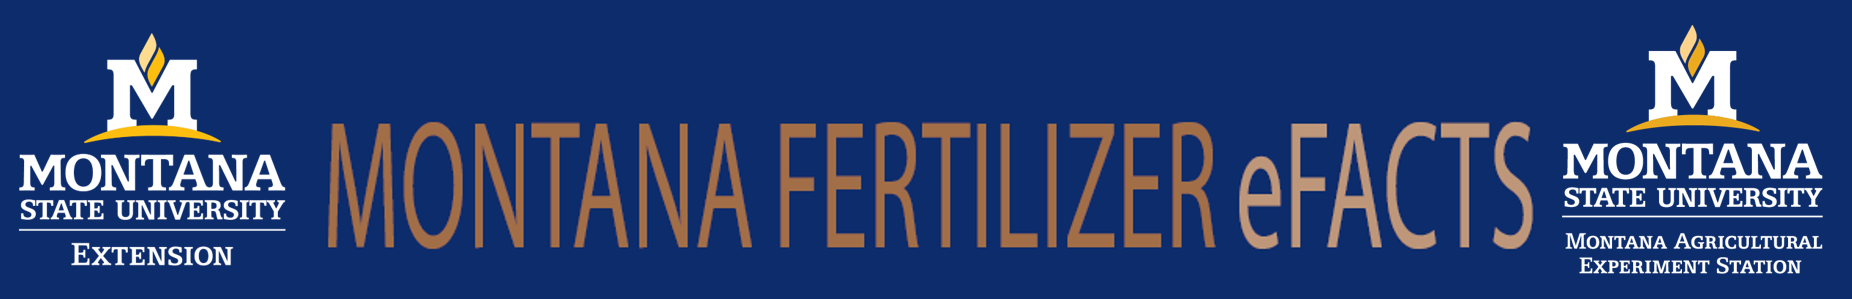 Montana Fertilizer eFacts with logos for MSU Extension and Montana Agricultural Experiment Stations